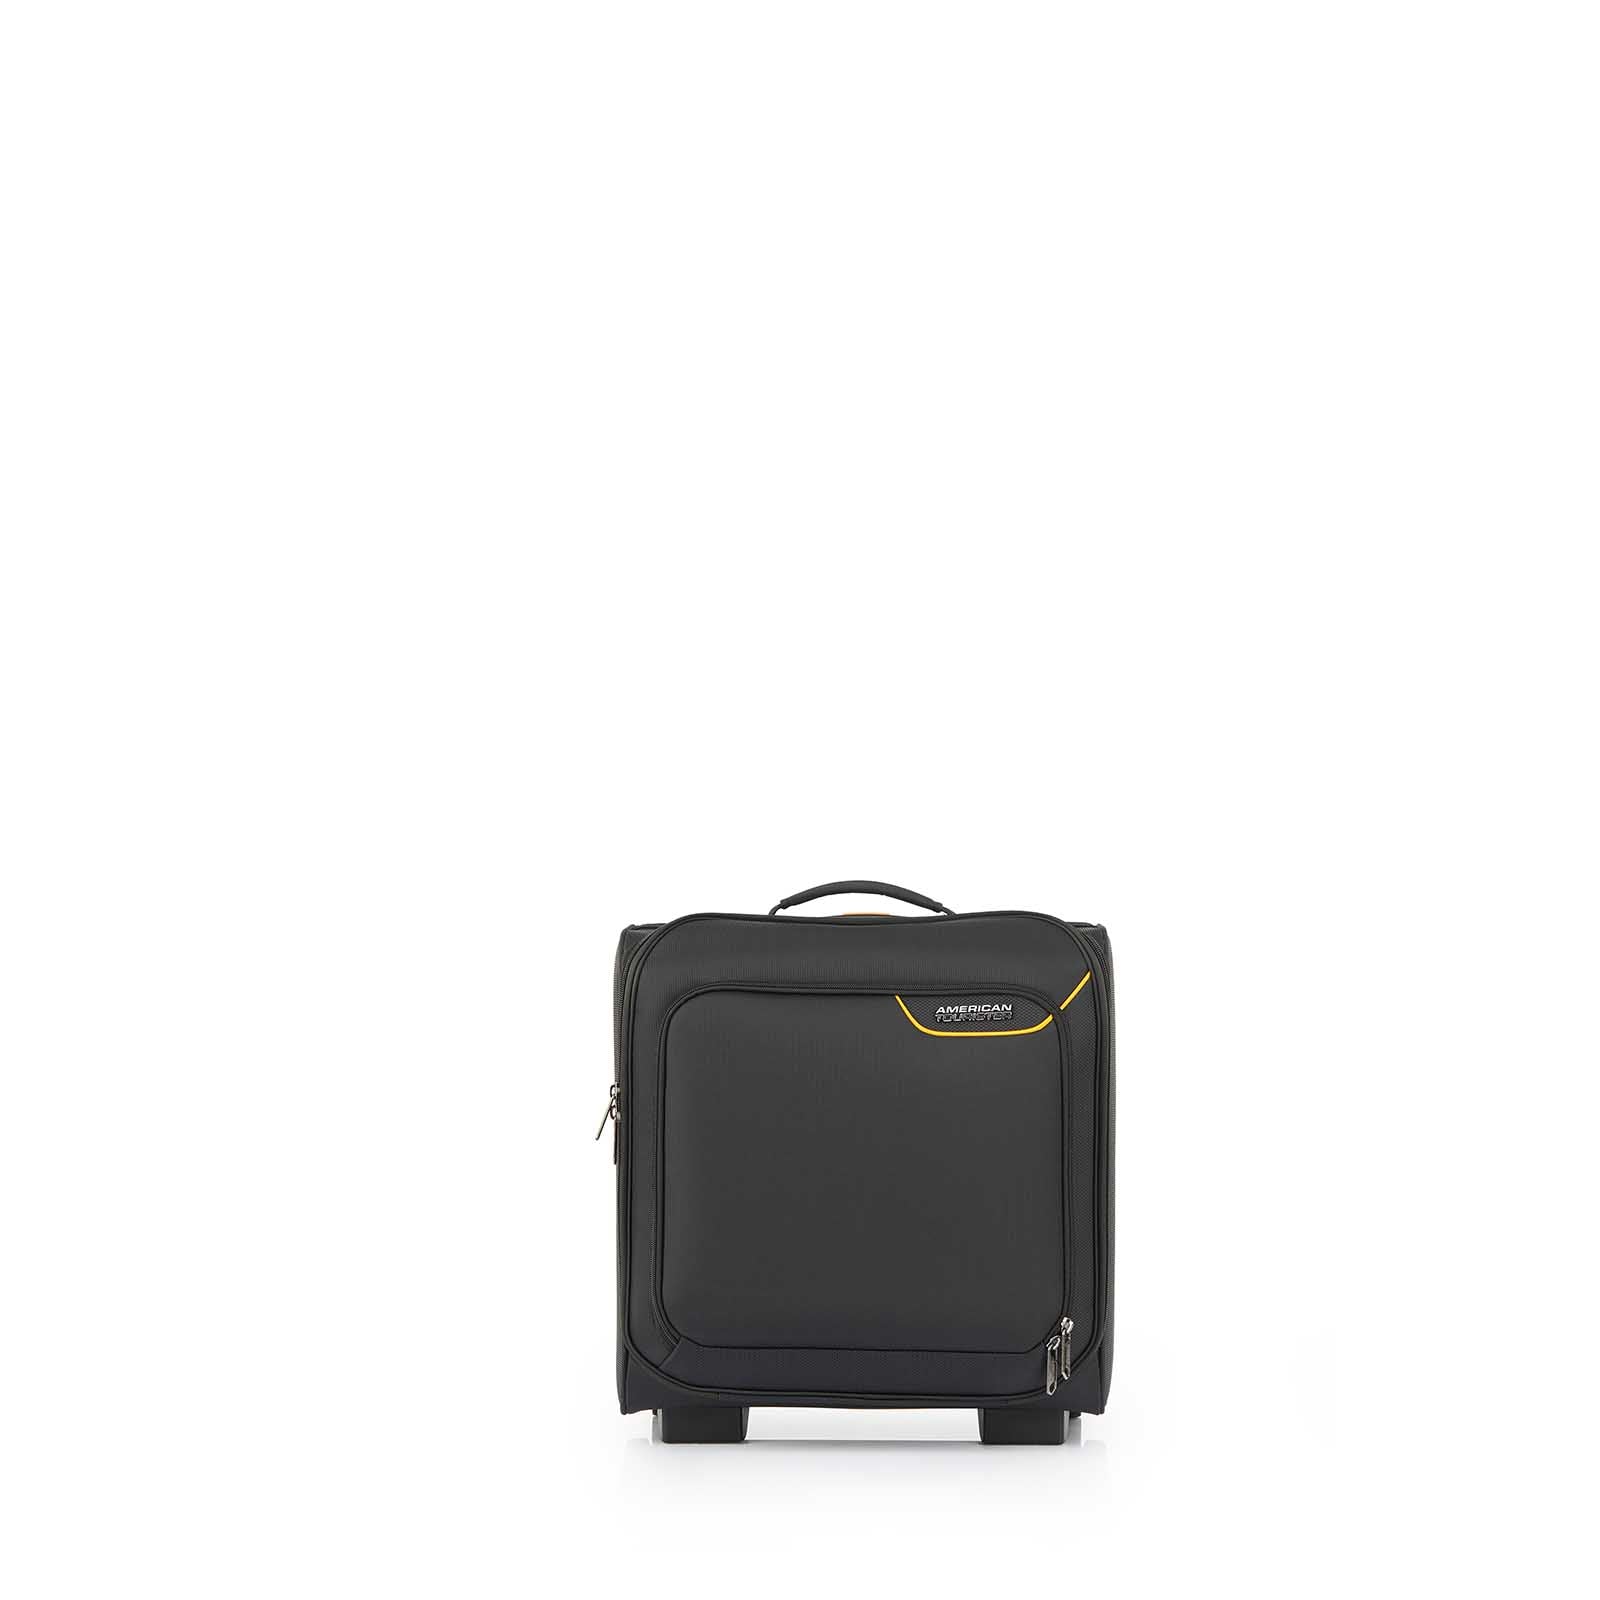 American-Tourister-Applite-4-Eco-Underseater-Suitcase-Black-Mustard-Front